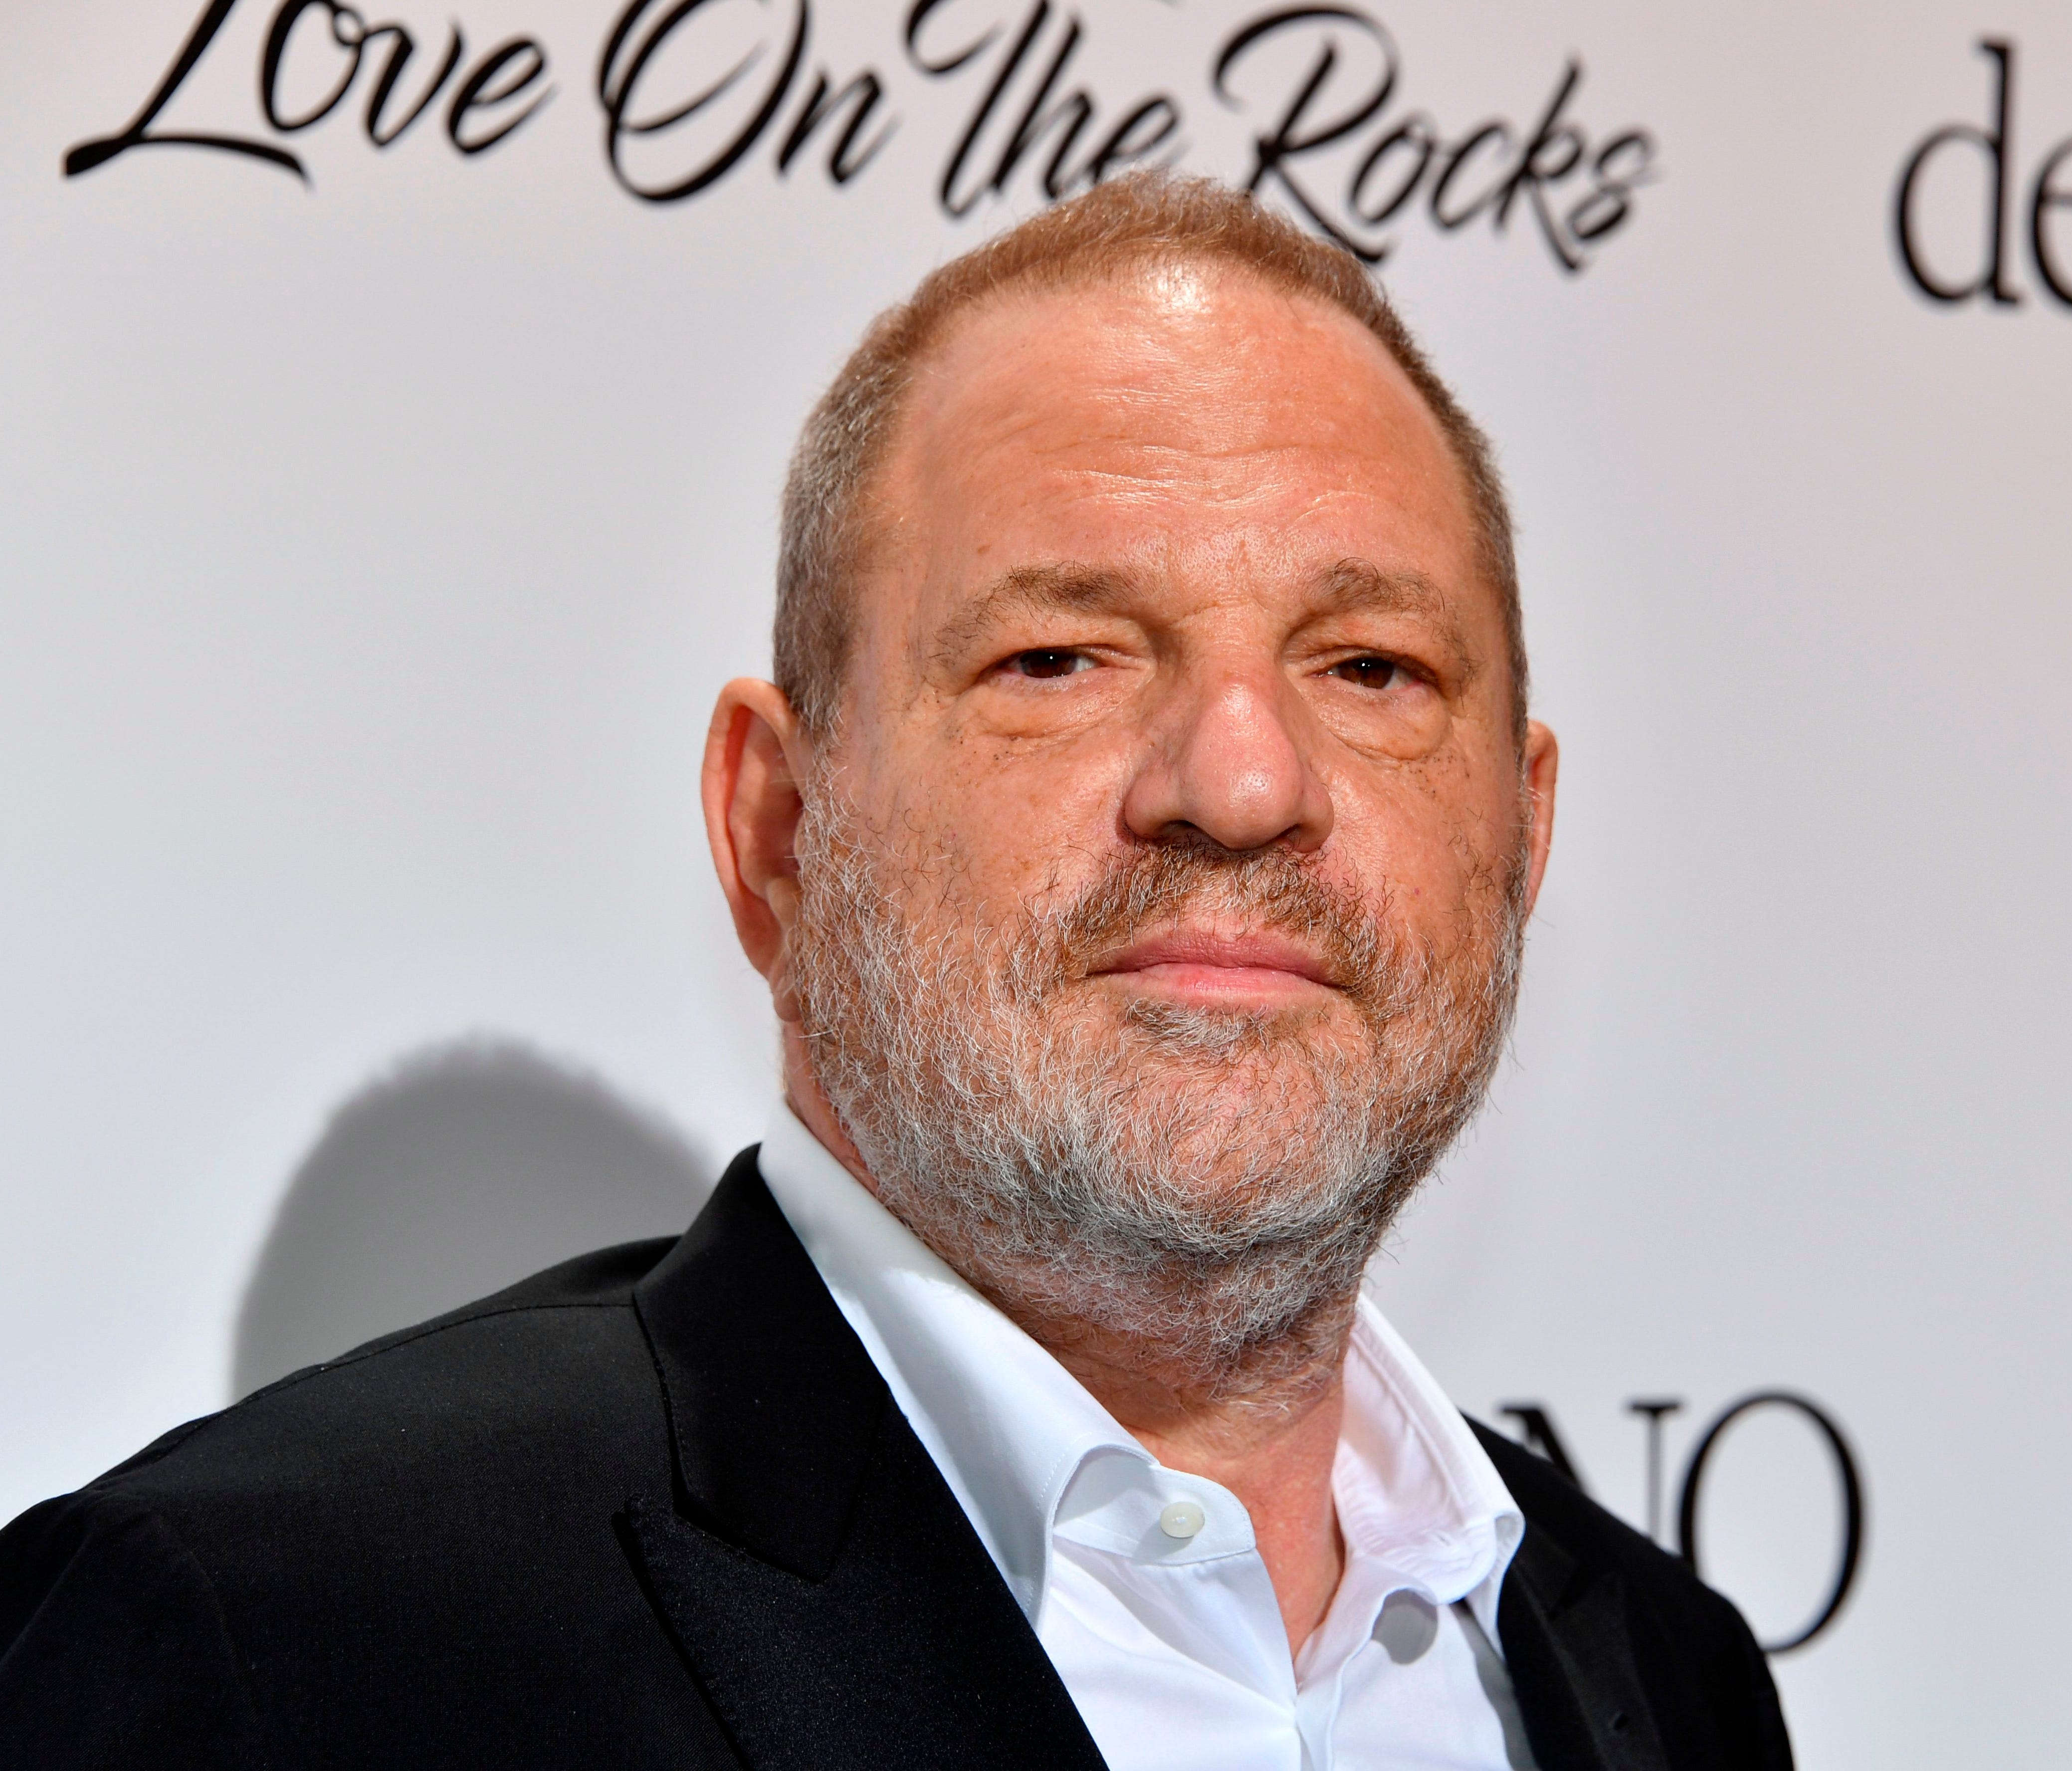 The New York attorney general has opened an inquiry into the Weinstein Company.